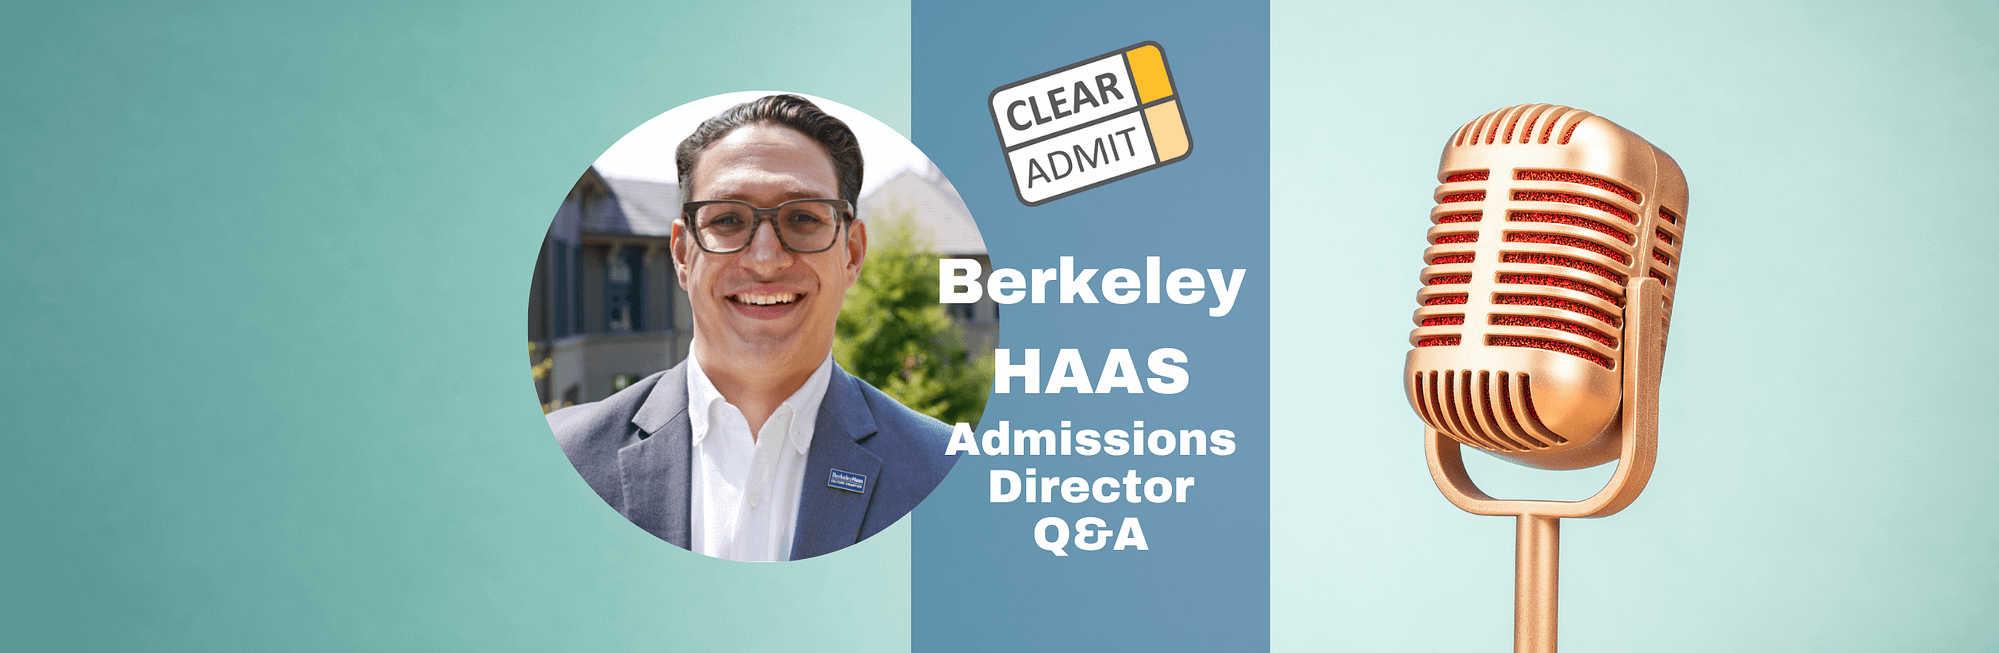 admissions director haas